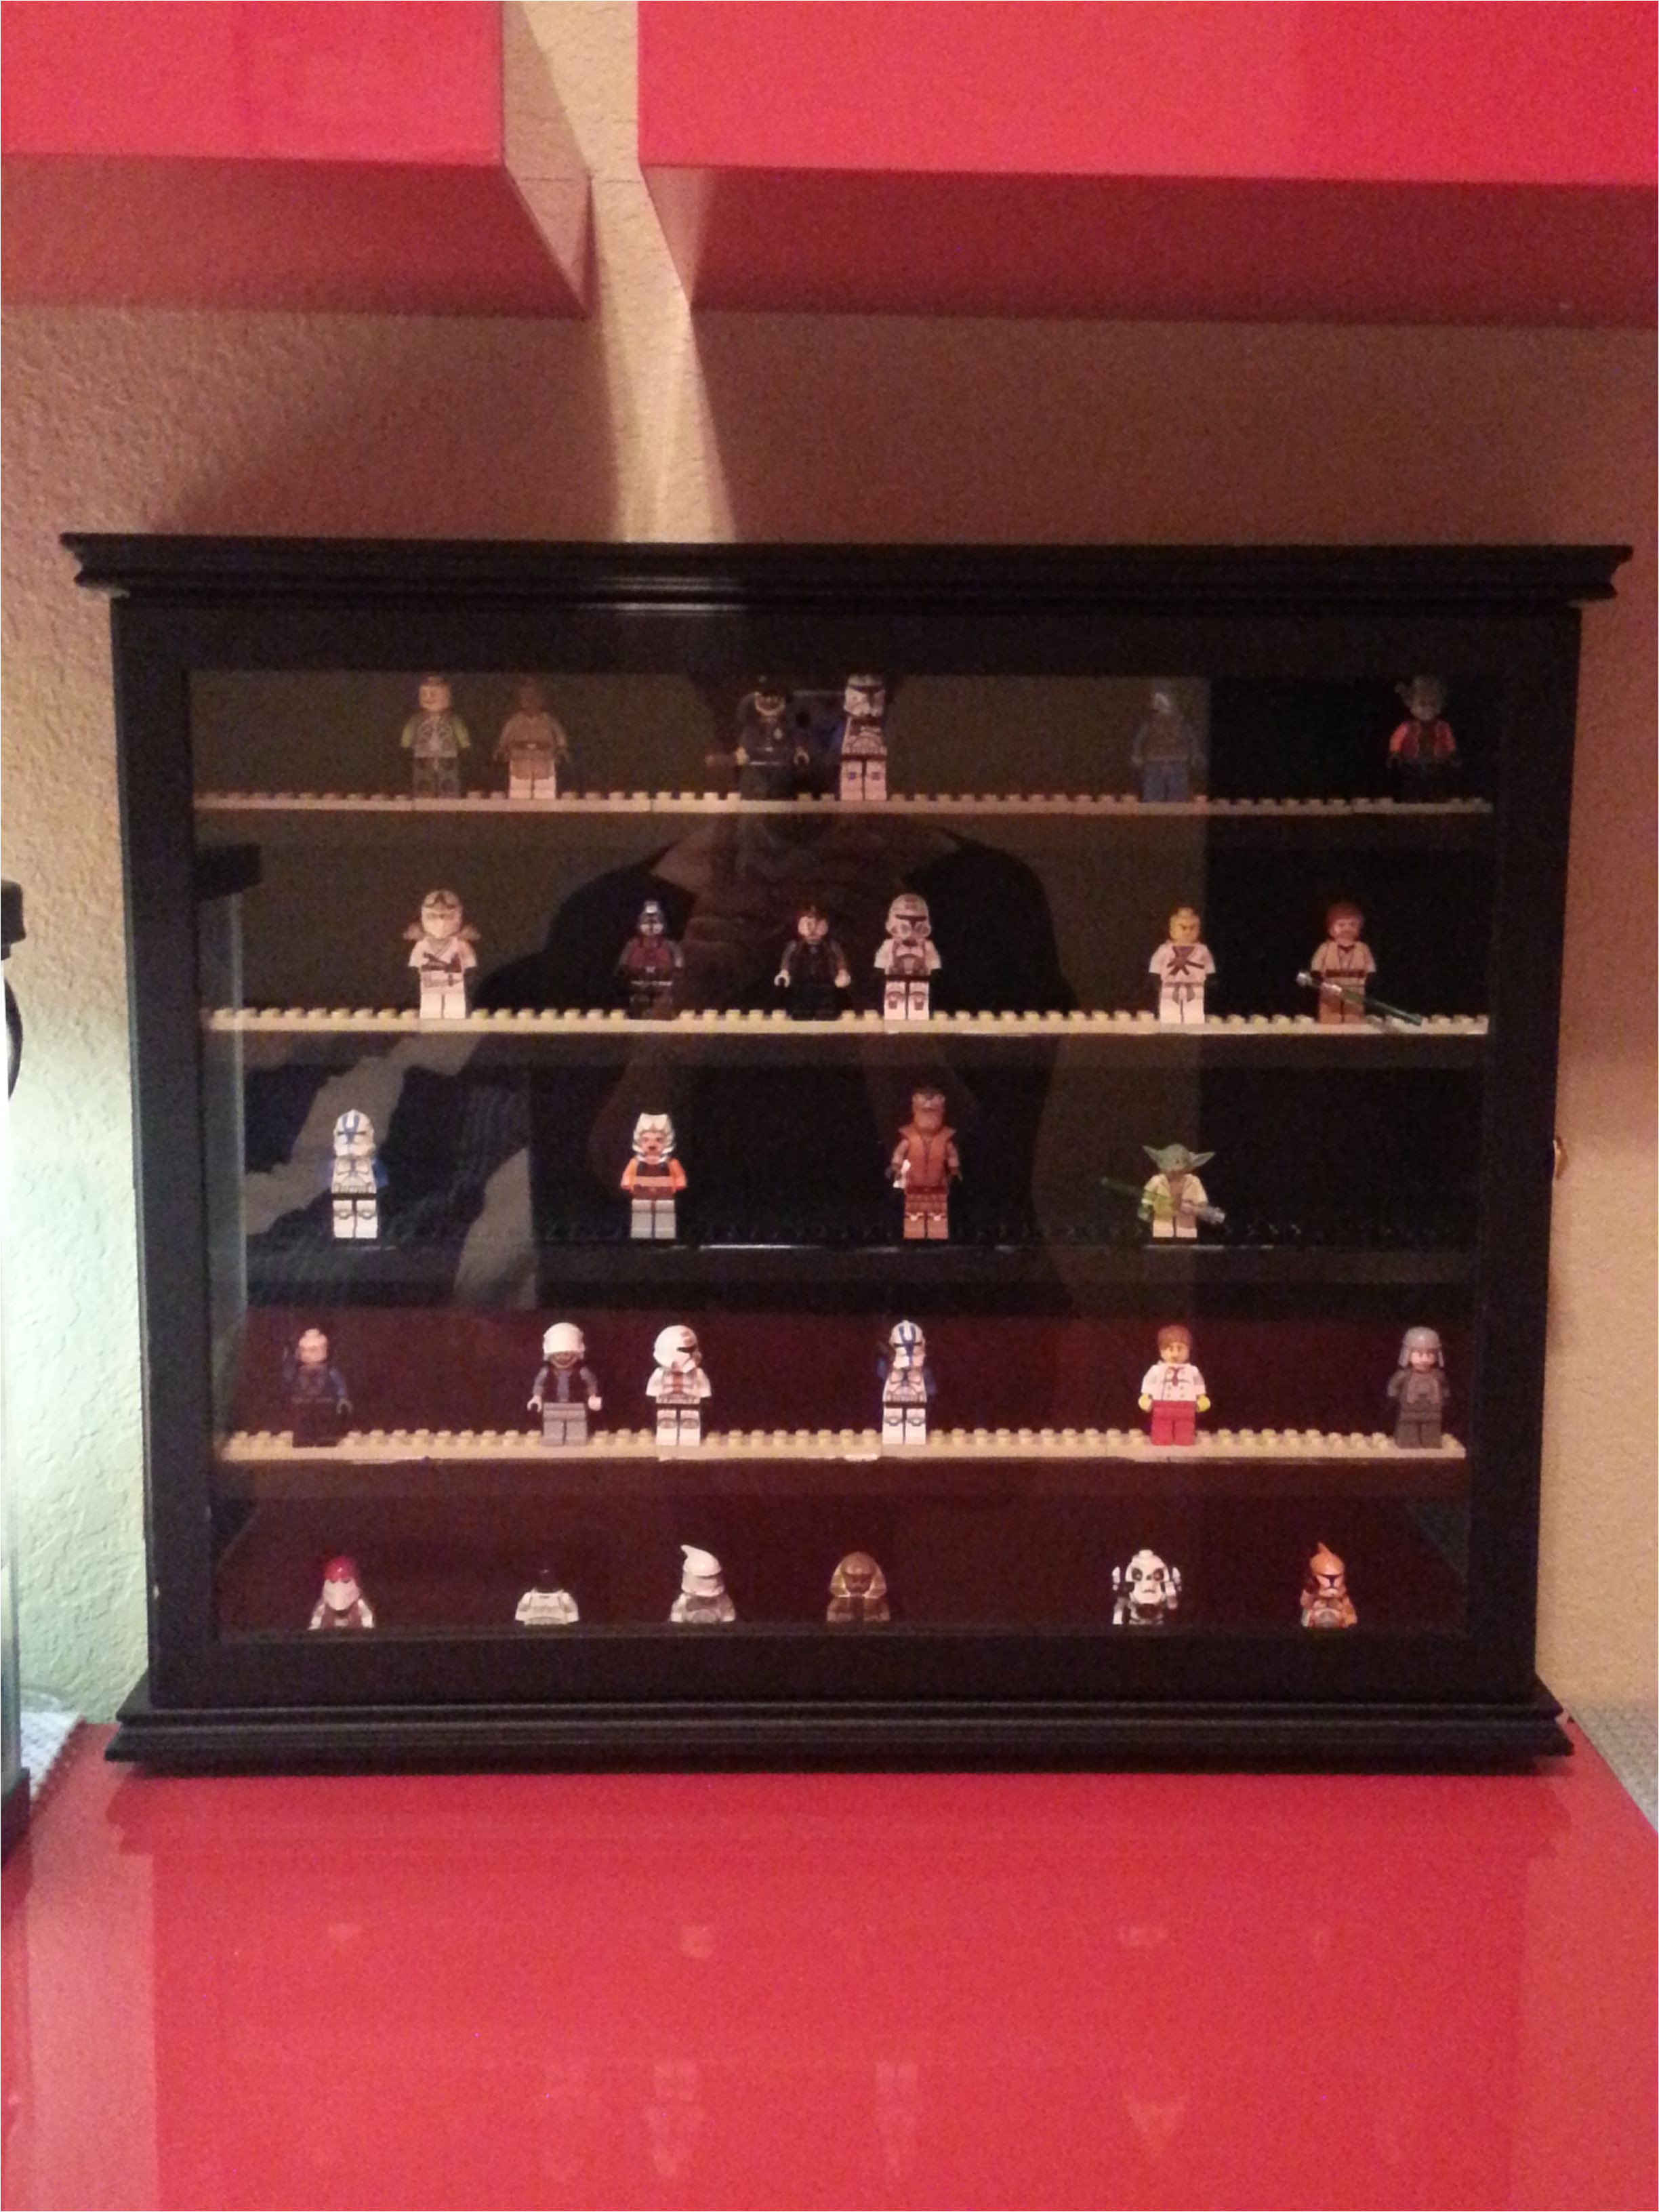 lego minifigure display case made from a golf ball display case i found on clearance at kohl s for 9 99 i glued flat lego pieces to the shelves and voila